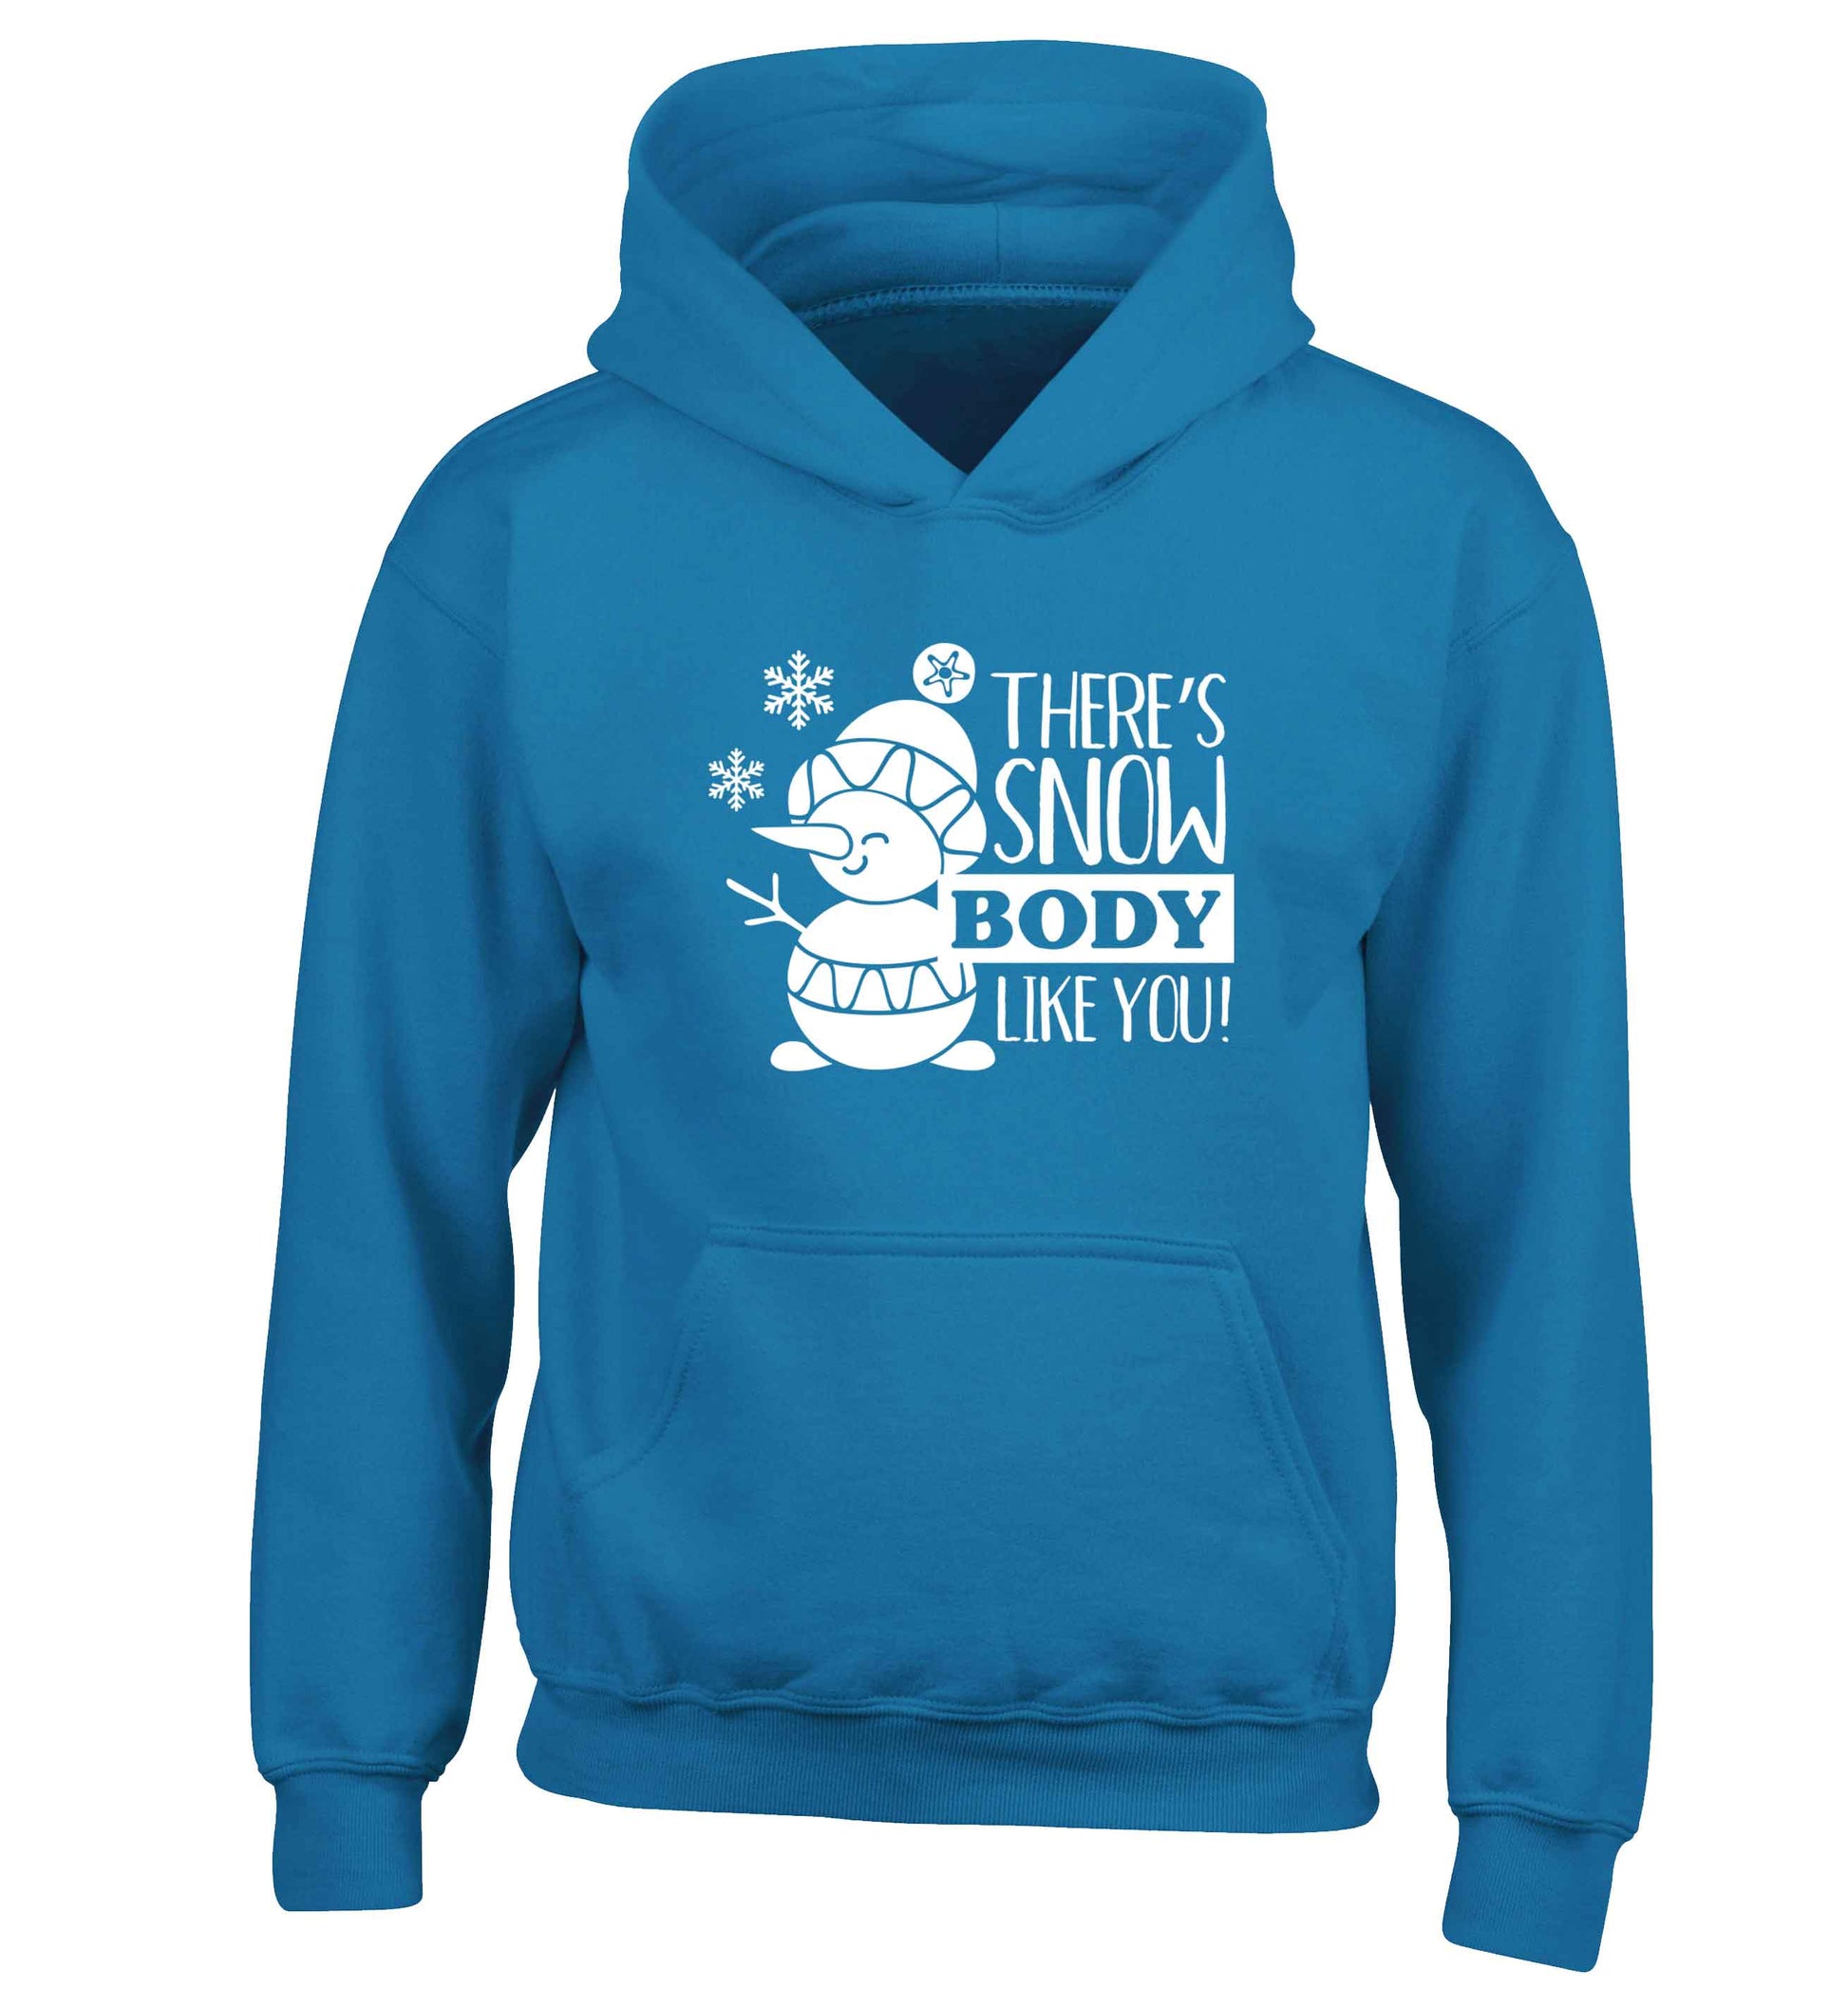 There's snow body like you children's blue hoodie 12-13 Years